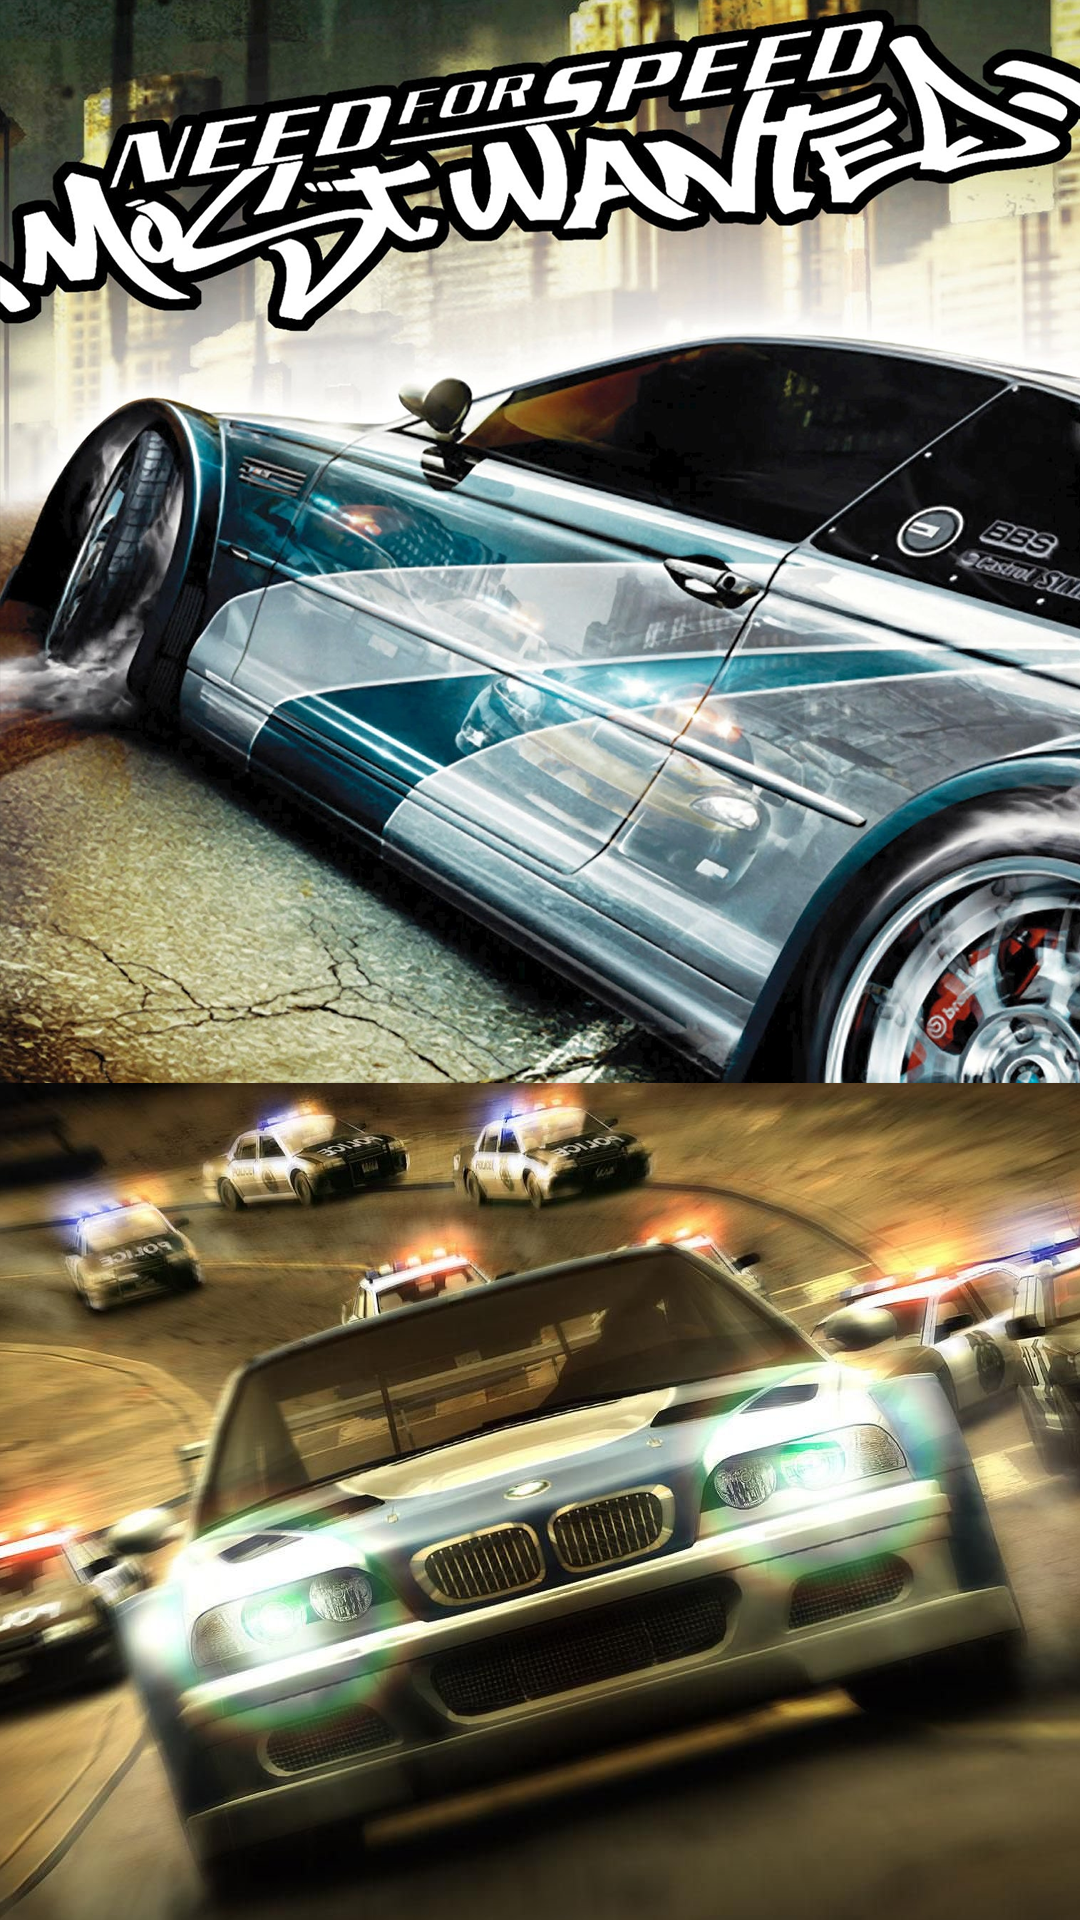 Need for Speed: Most Wanted (2005)